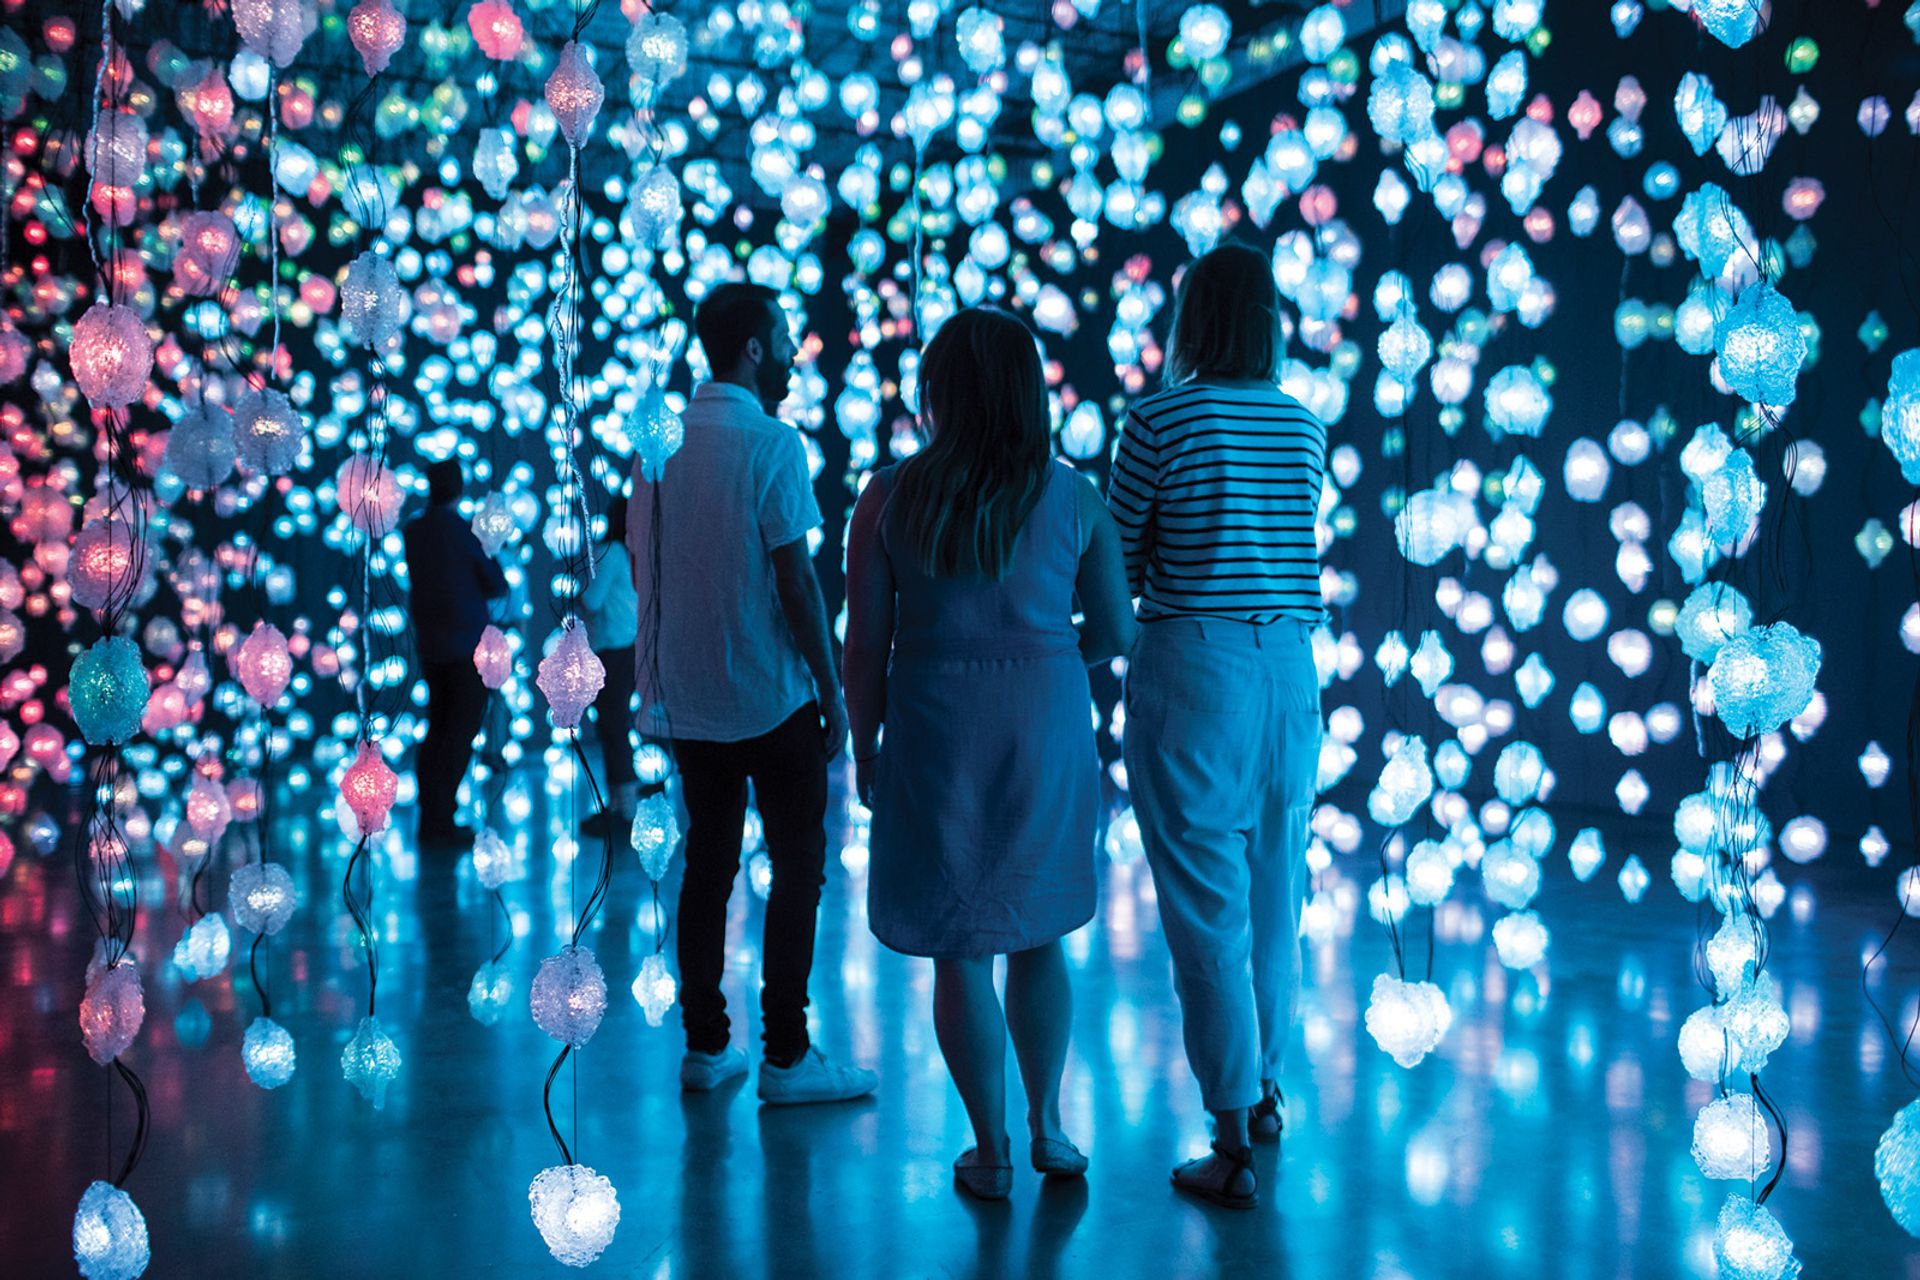 Pipilotti Rist’s Pixelwald Motherboard (Pixel Forest Mutterplatte) (2016), part of the artist’s popular exhibition at the Museum of Contemporary Art Australia in 2017-18. Below, the museum’s director, Liz Ann Macgregor © the artist; courtesy of the artist, Hauser & Wirth and Luhring Augustine; photo: Ken Leanfore